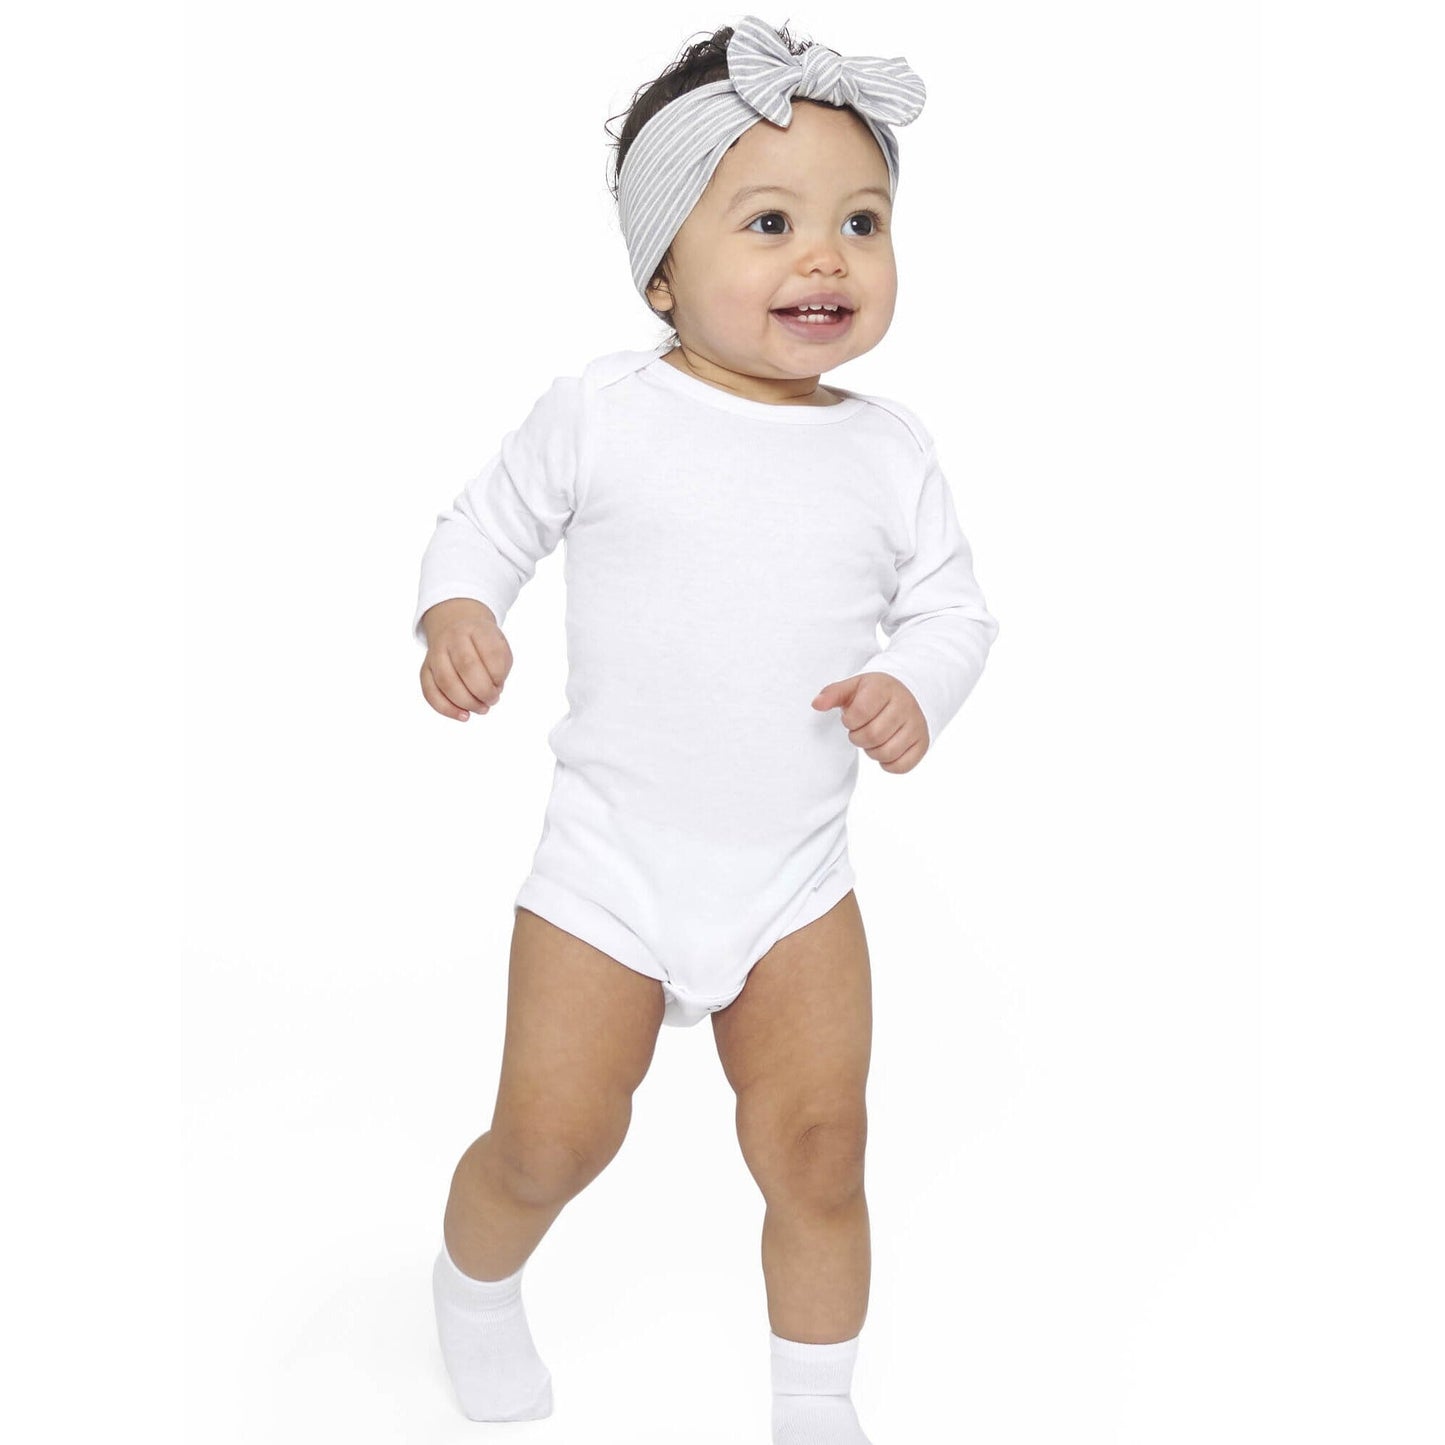 12-Pack Baby Neutral White Jersey Cuffed Bootie Socks